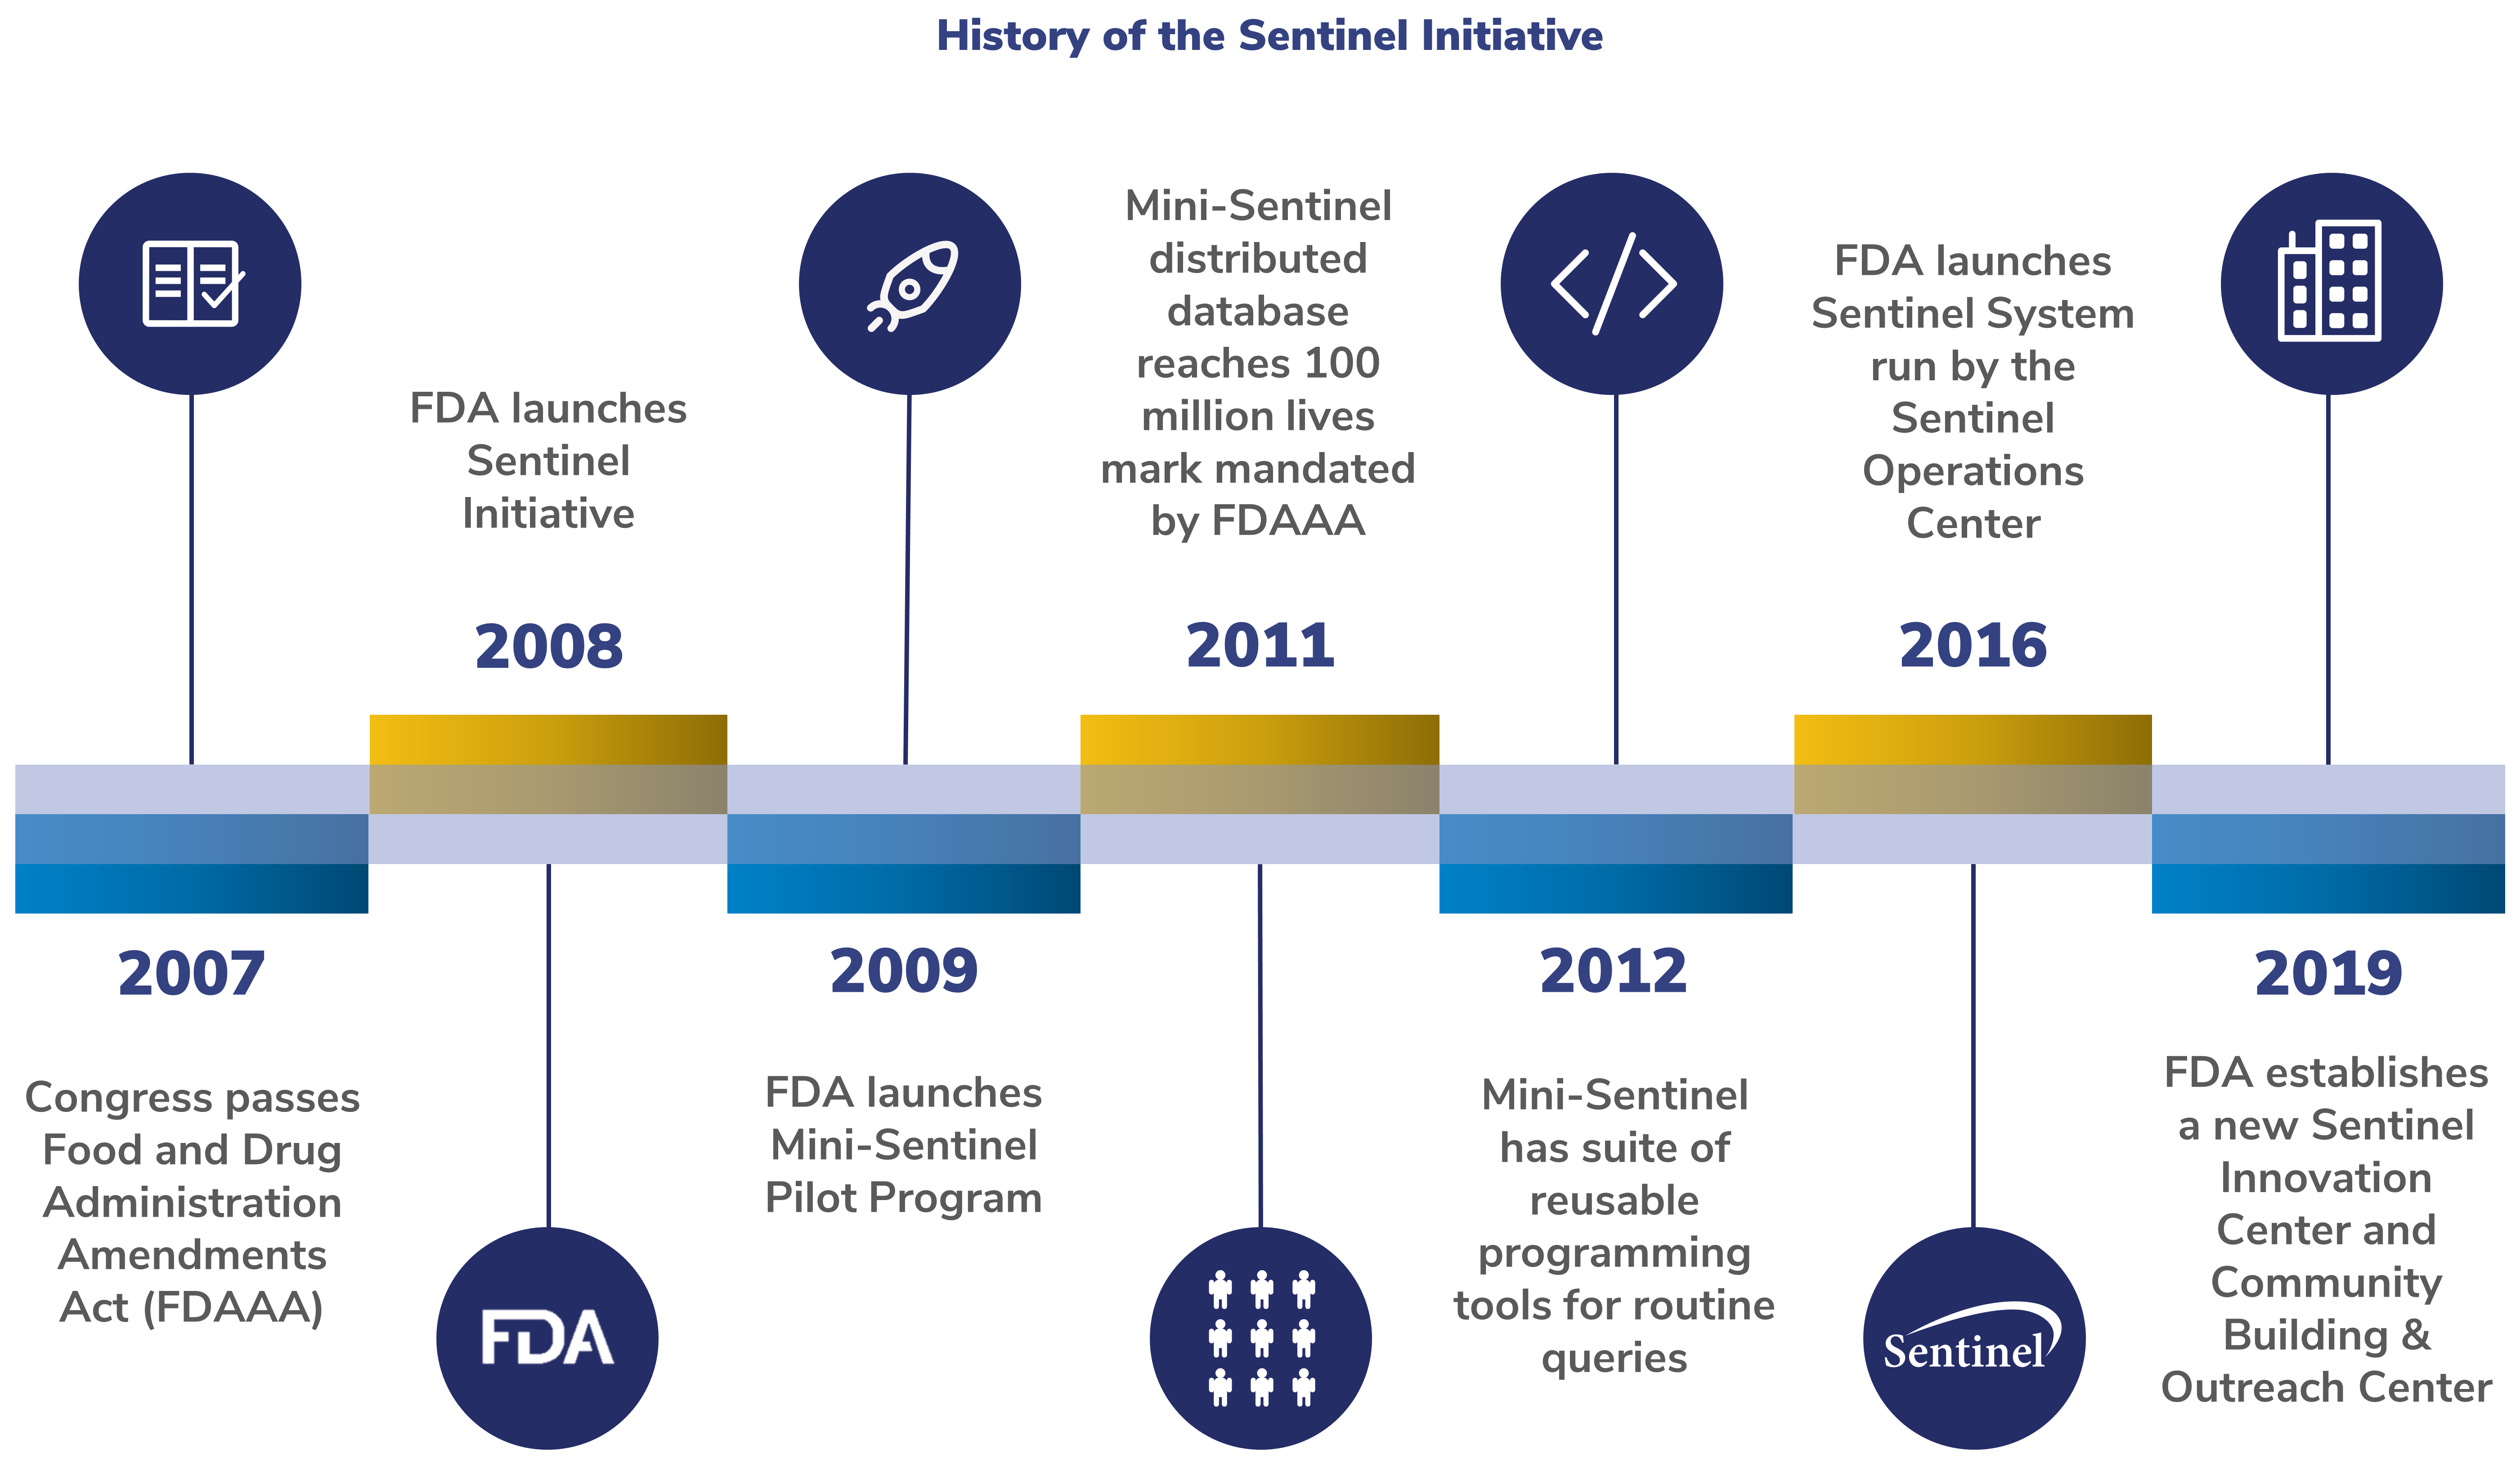 Timeline of the history of Sentinel Initiative